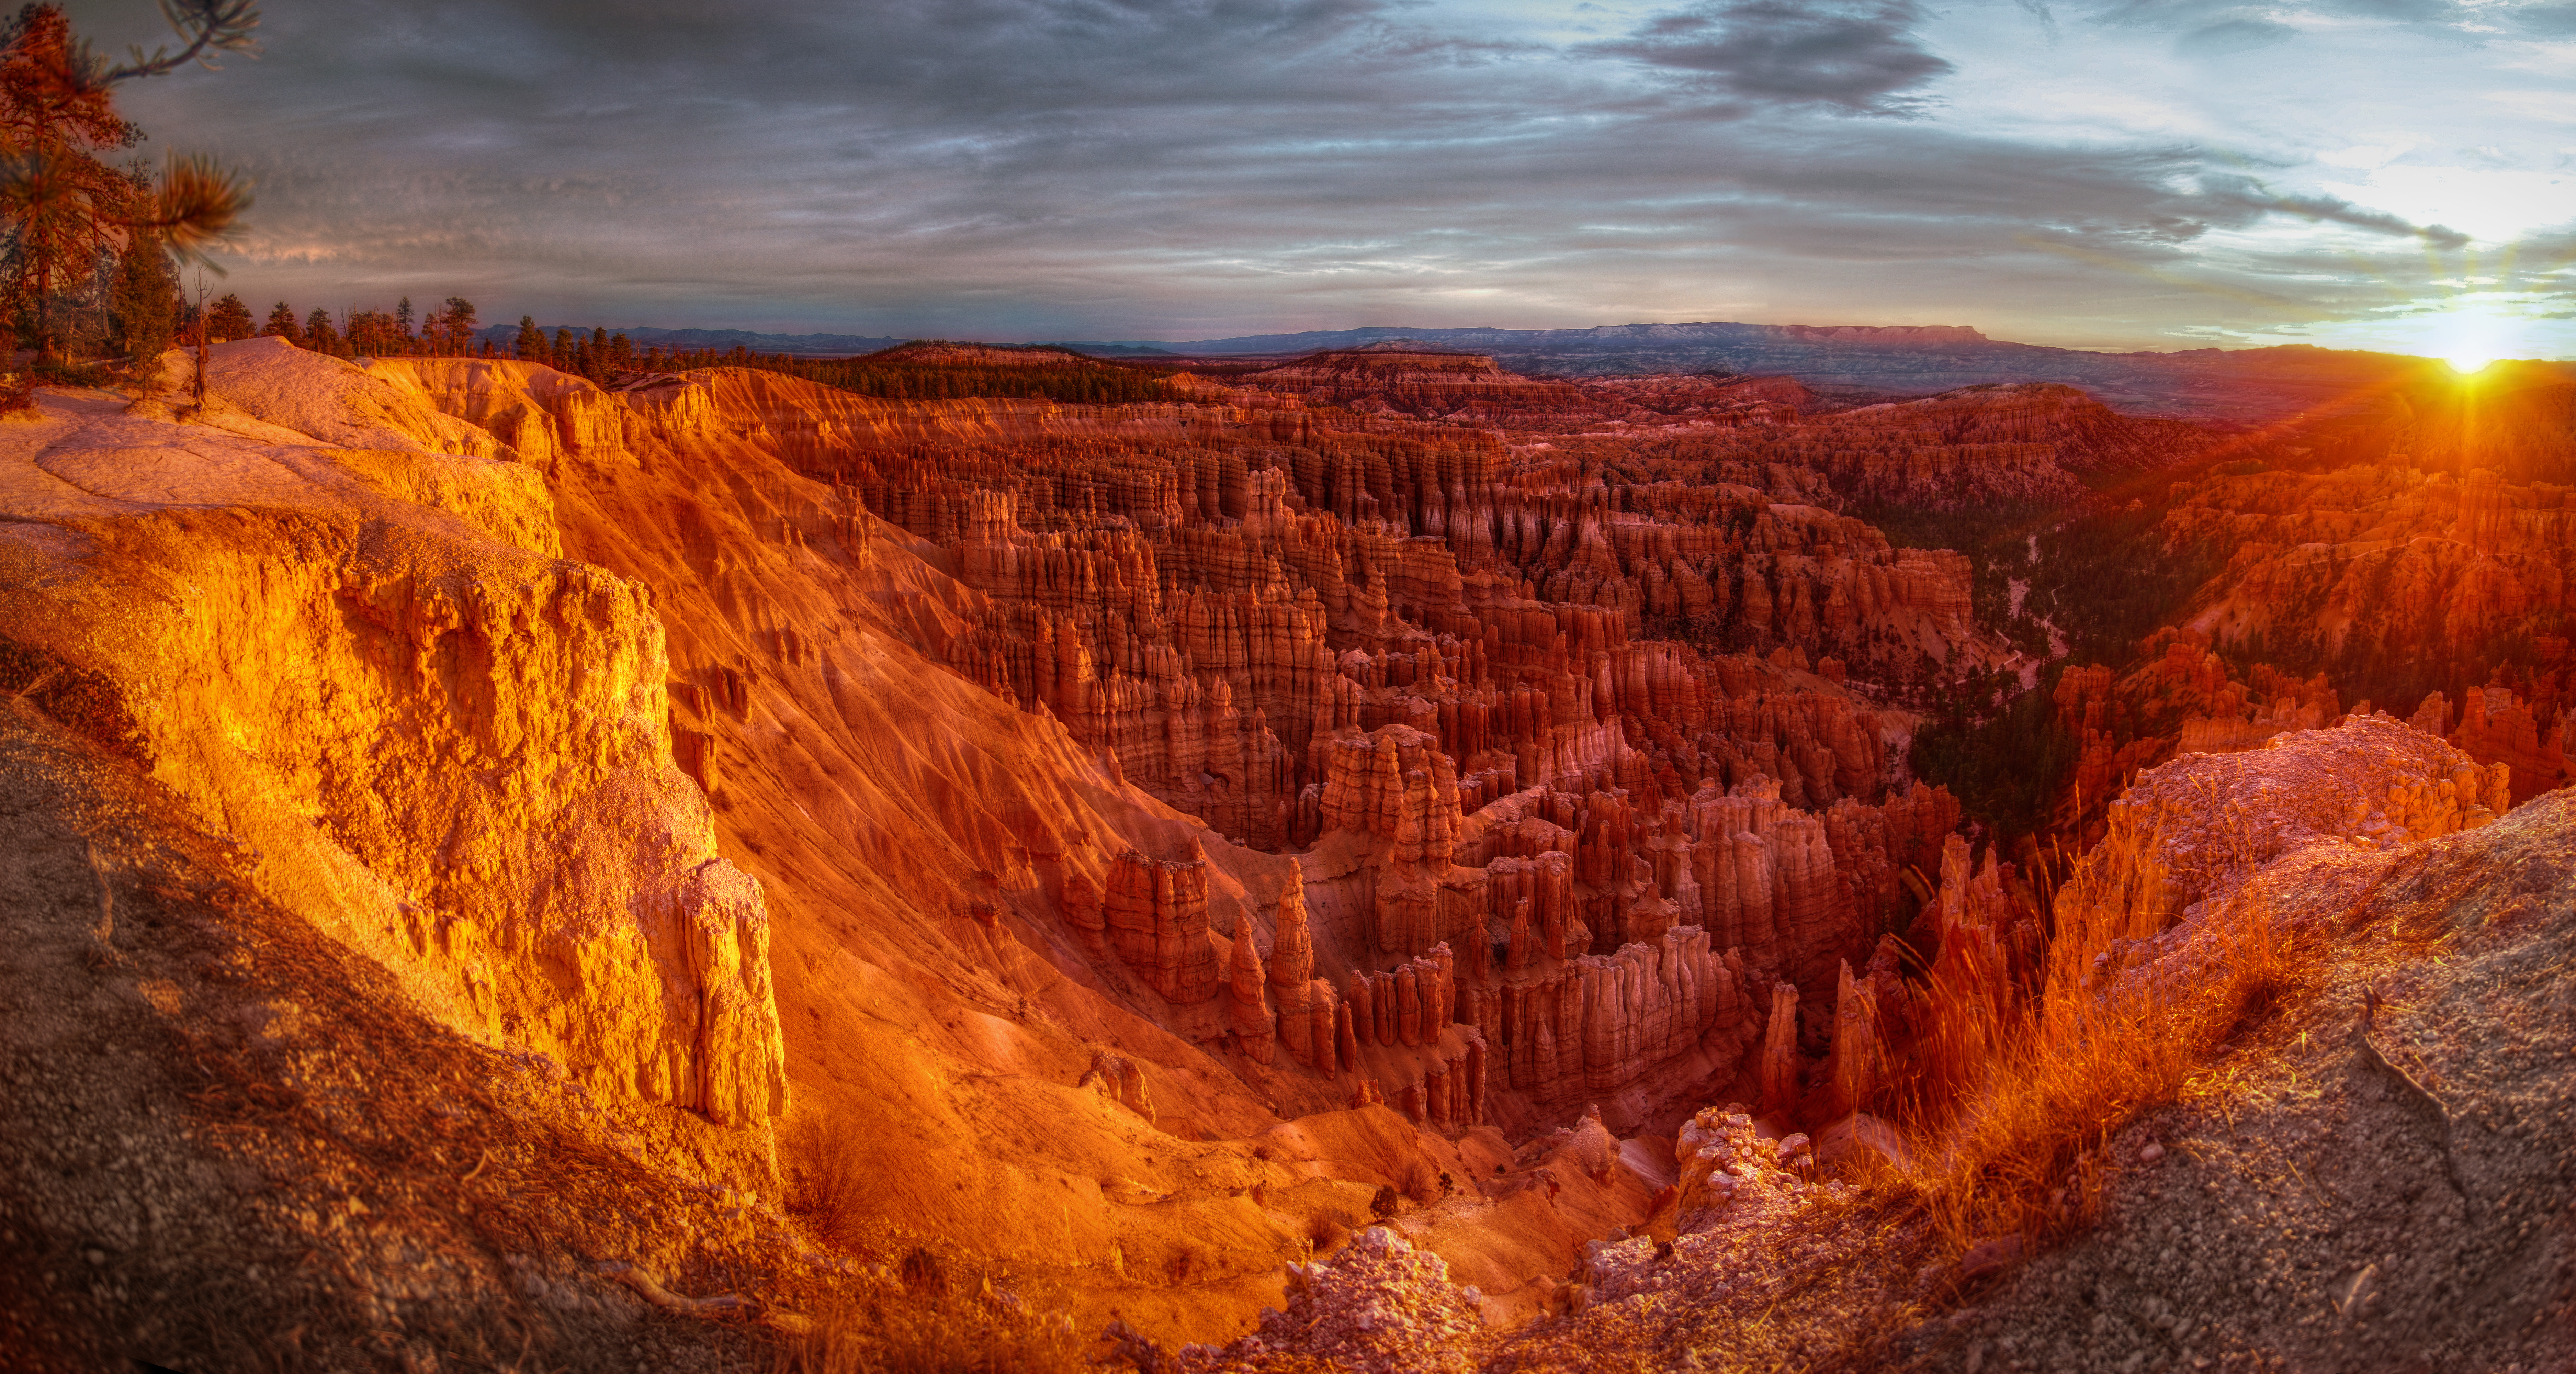 Sunrise over Bryce Canyon by PiConsti